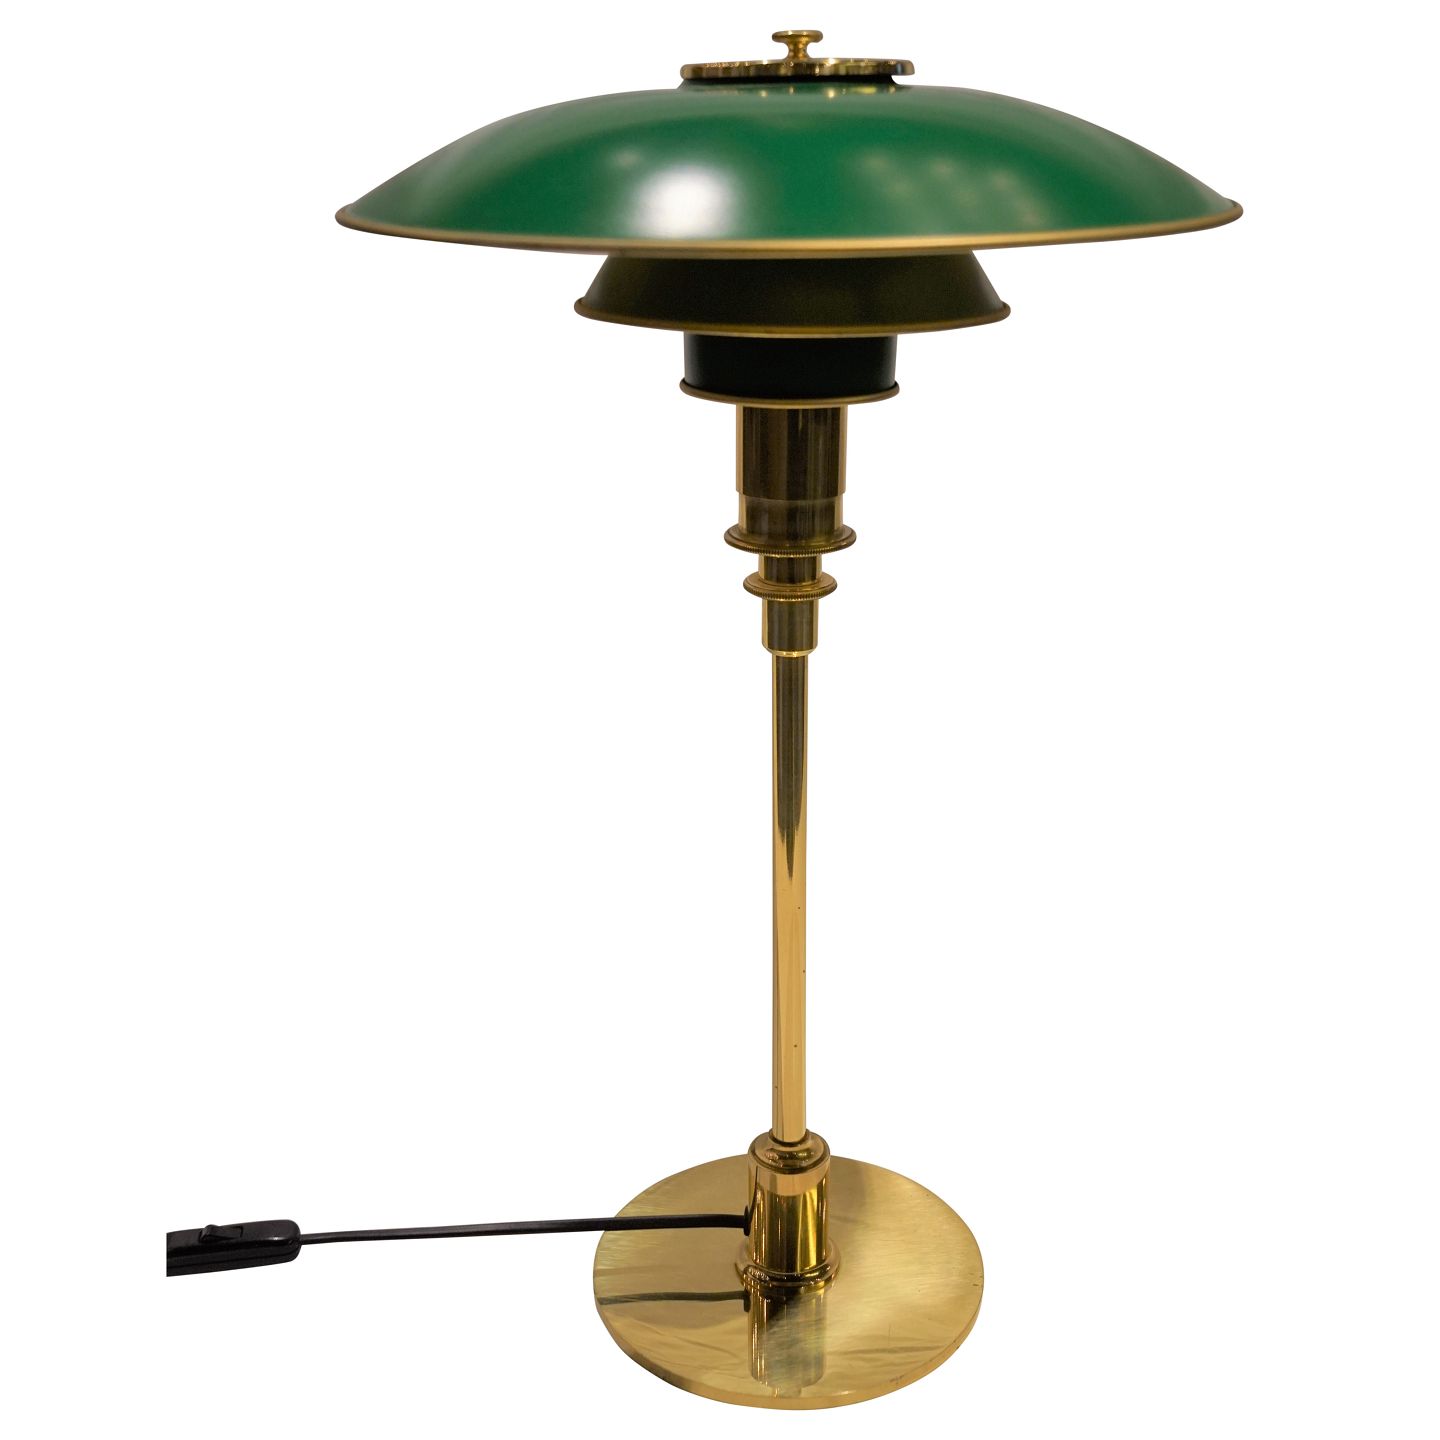 WorldAntique.net - Poul PH-3/2 table lamp, and green lacquered shades